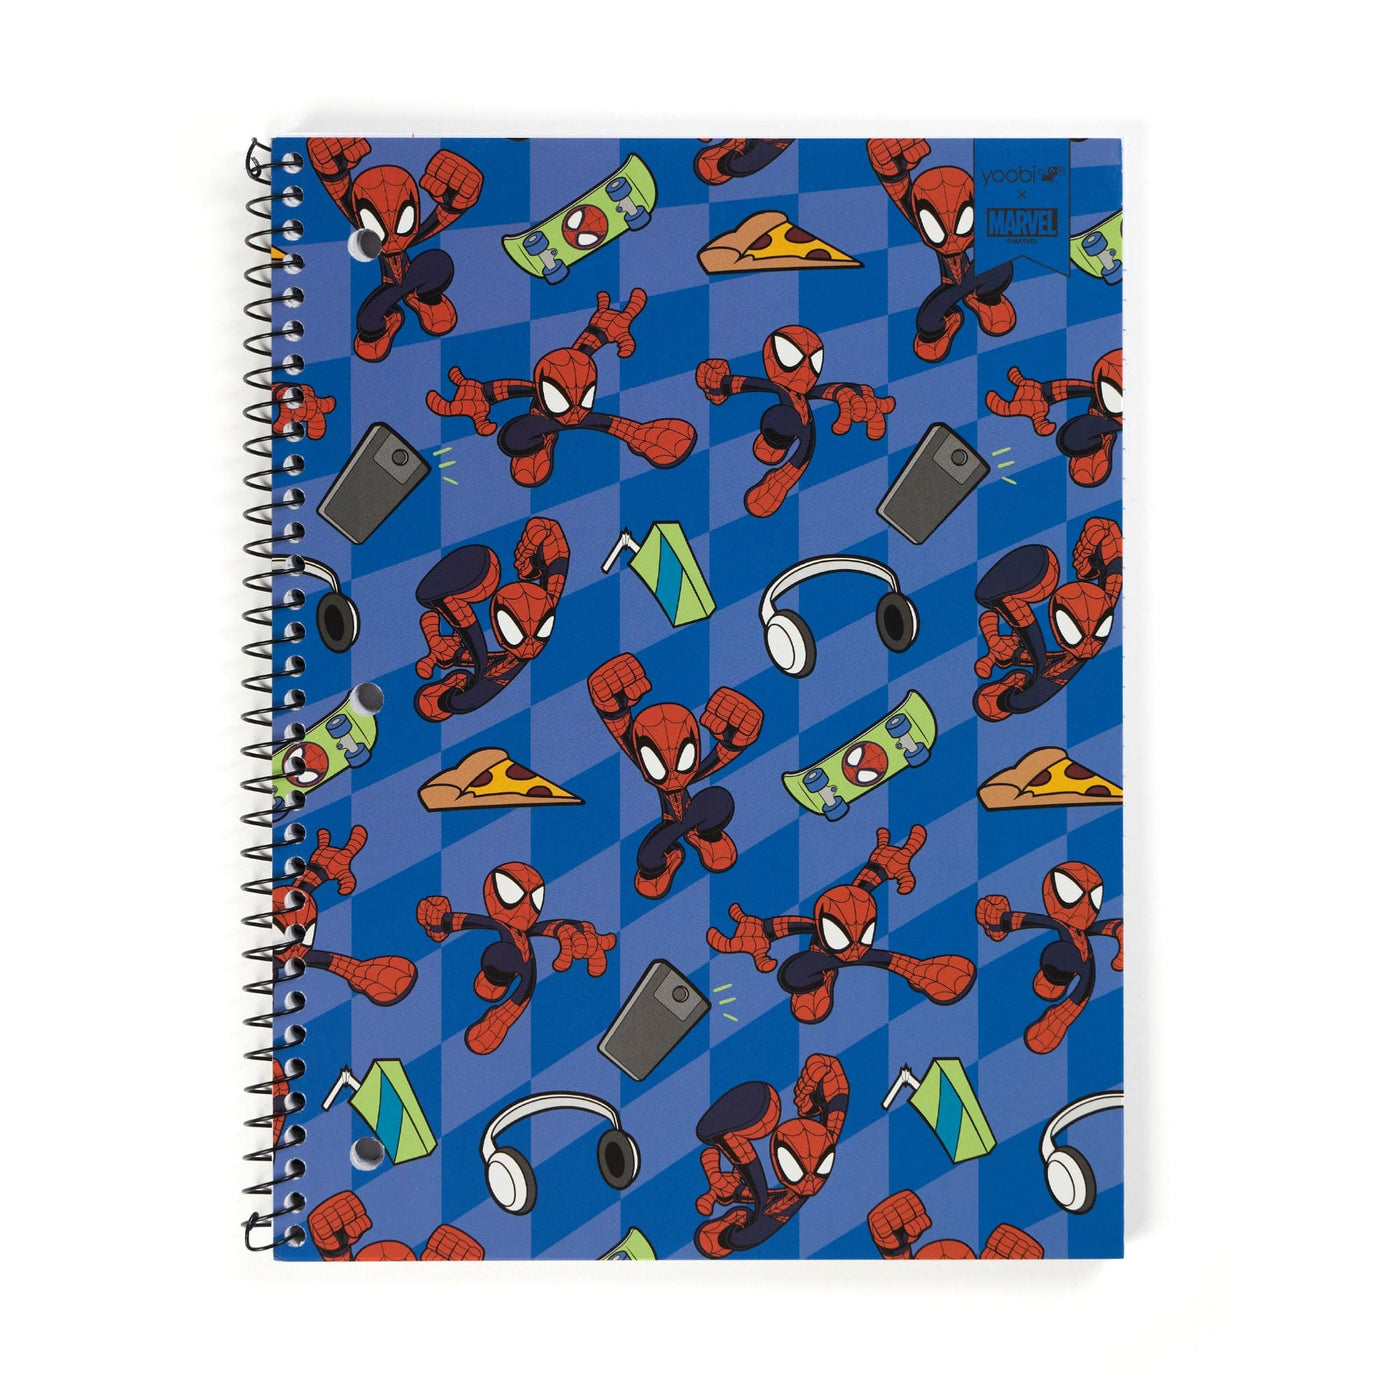 Blue one subject spiral notebook with Spider-man and skateboard print on front cover